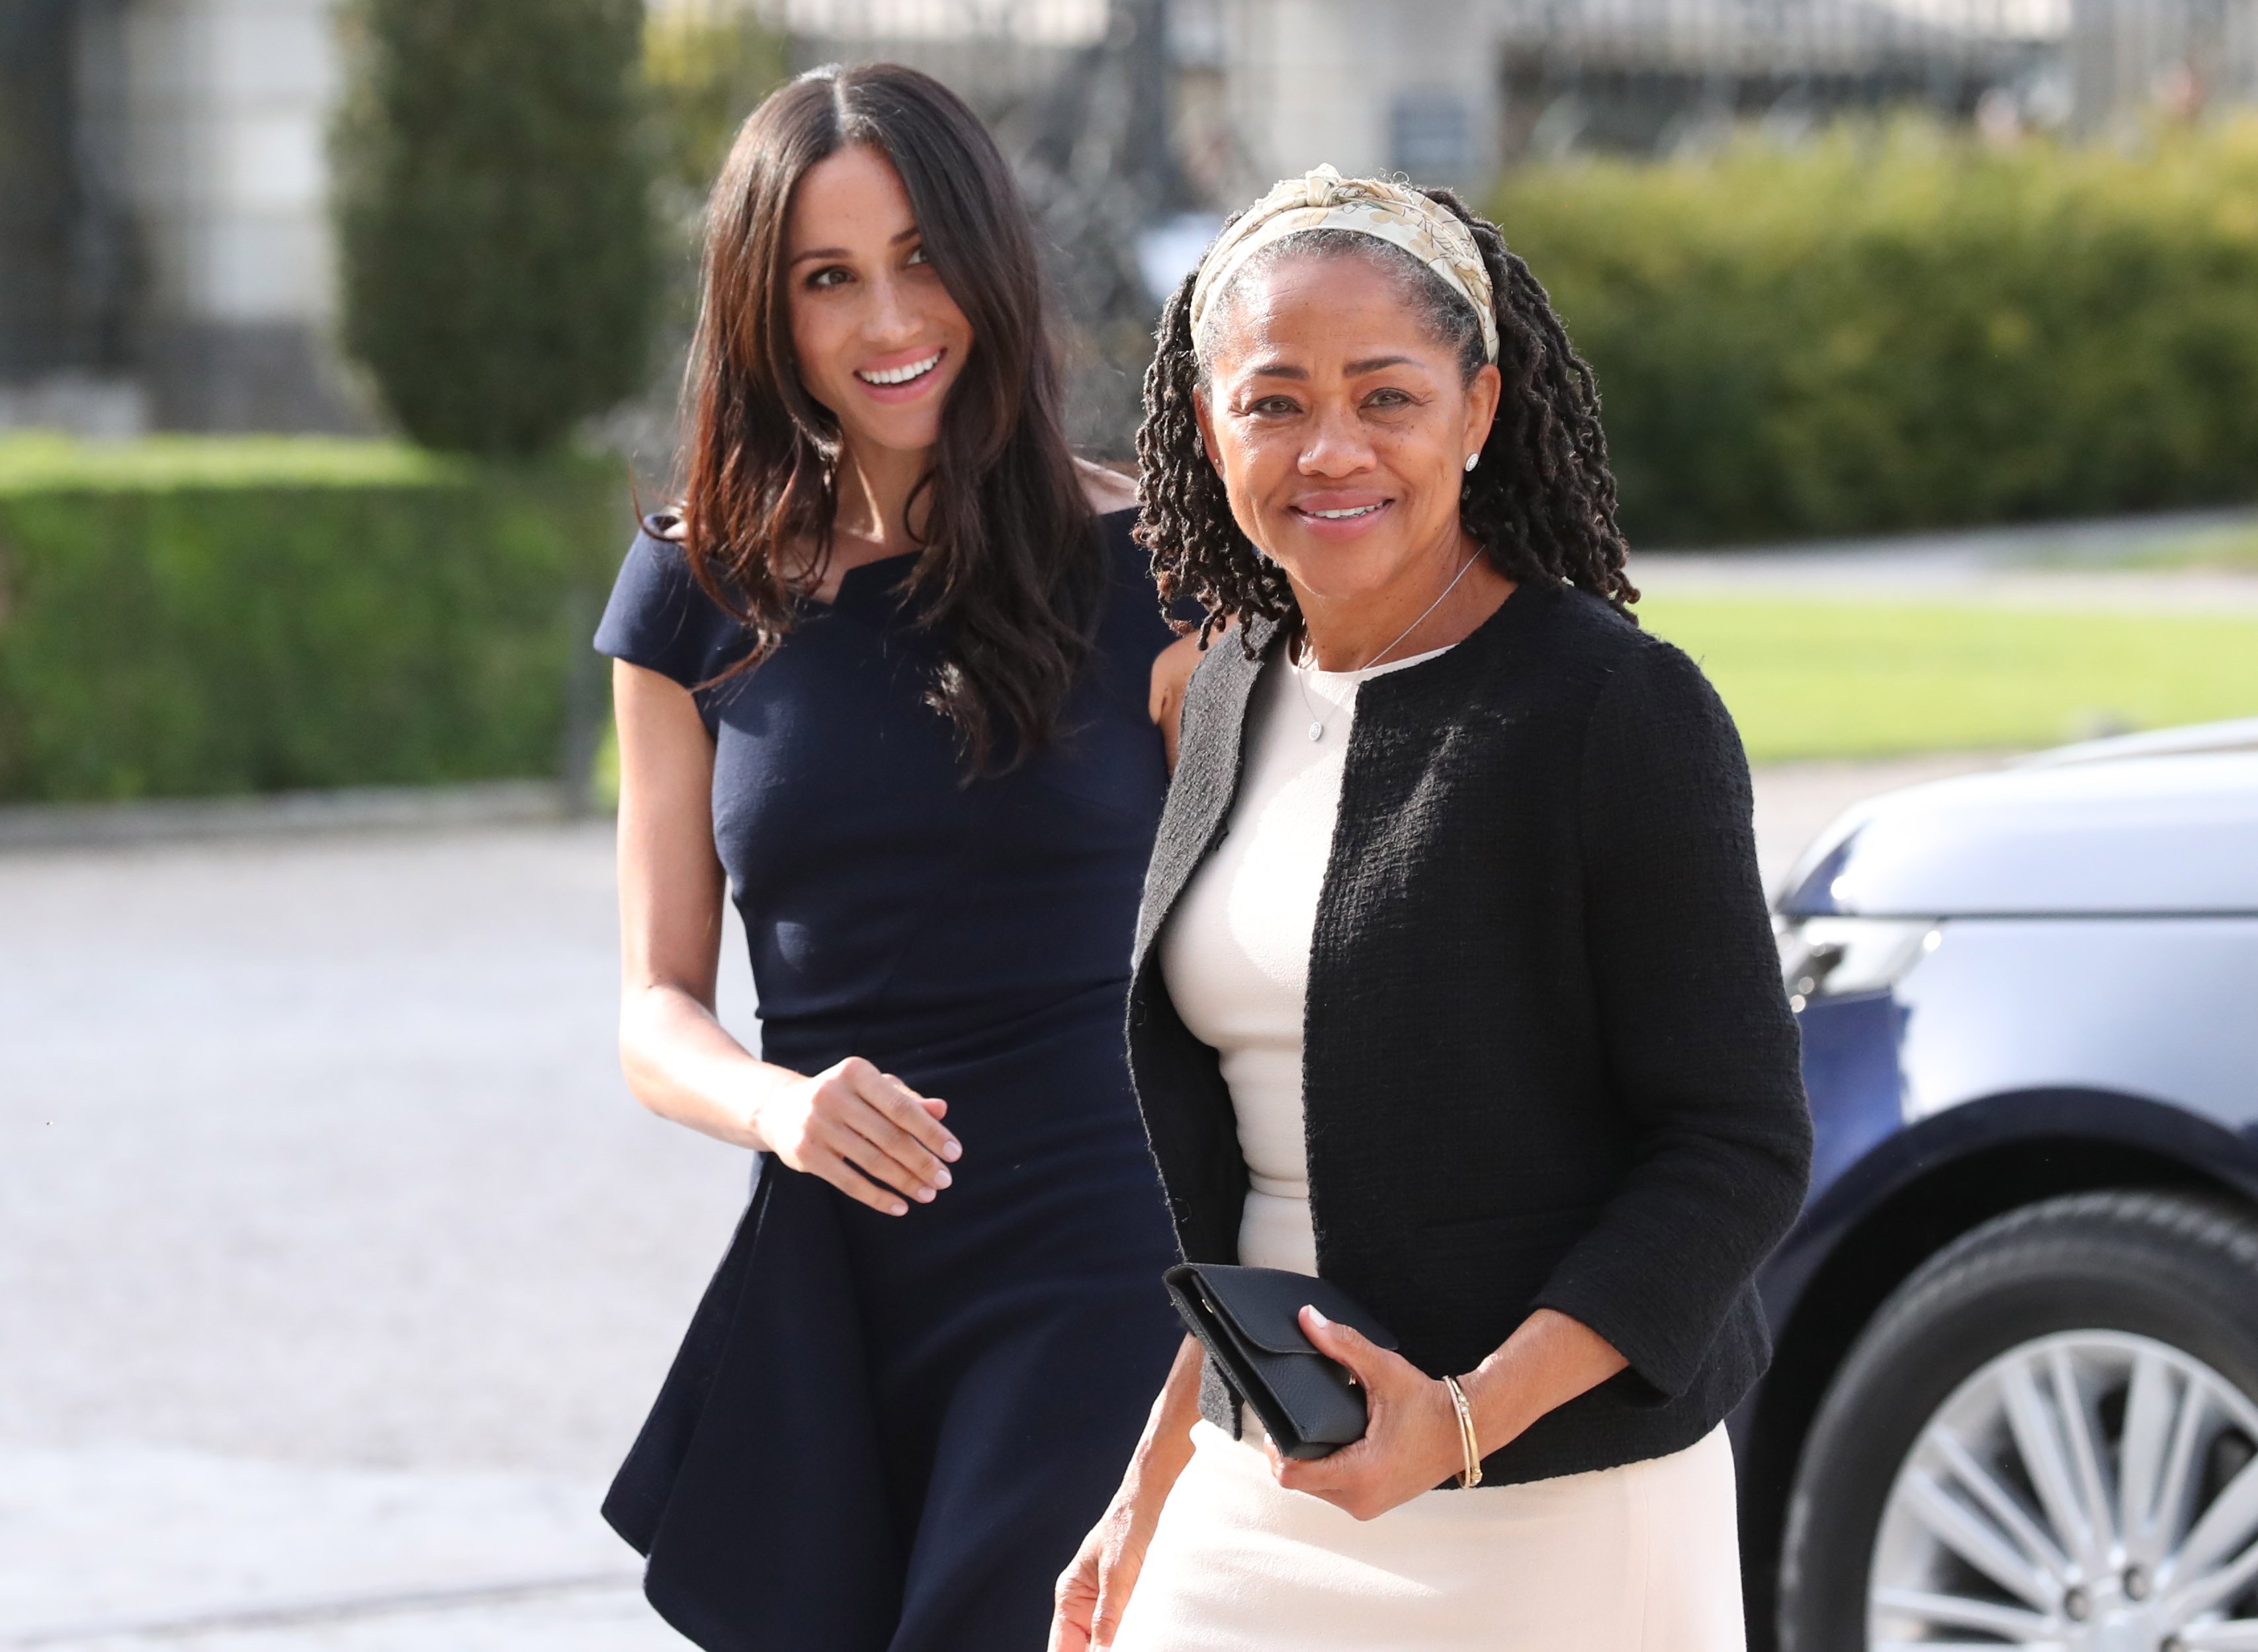 Meghan Markle and Doria Ragland at the Cliveden House Hotel on the National Trust's Cliveden Estate | Photo: Getty Images